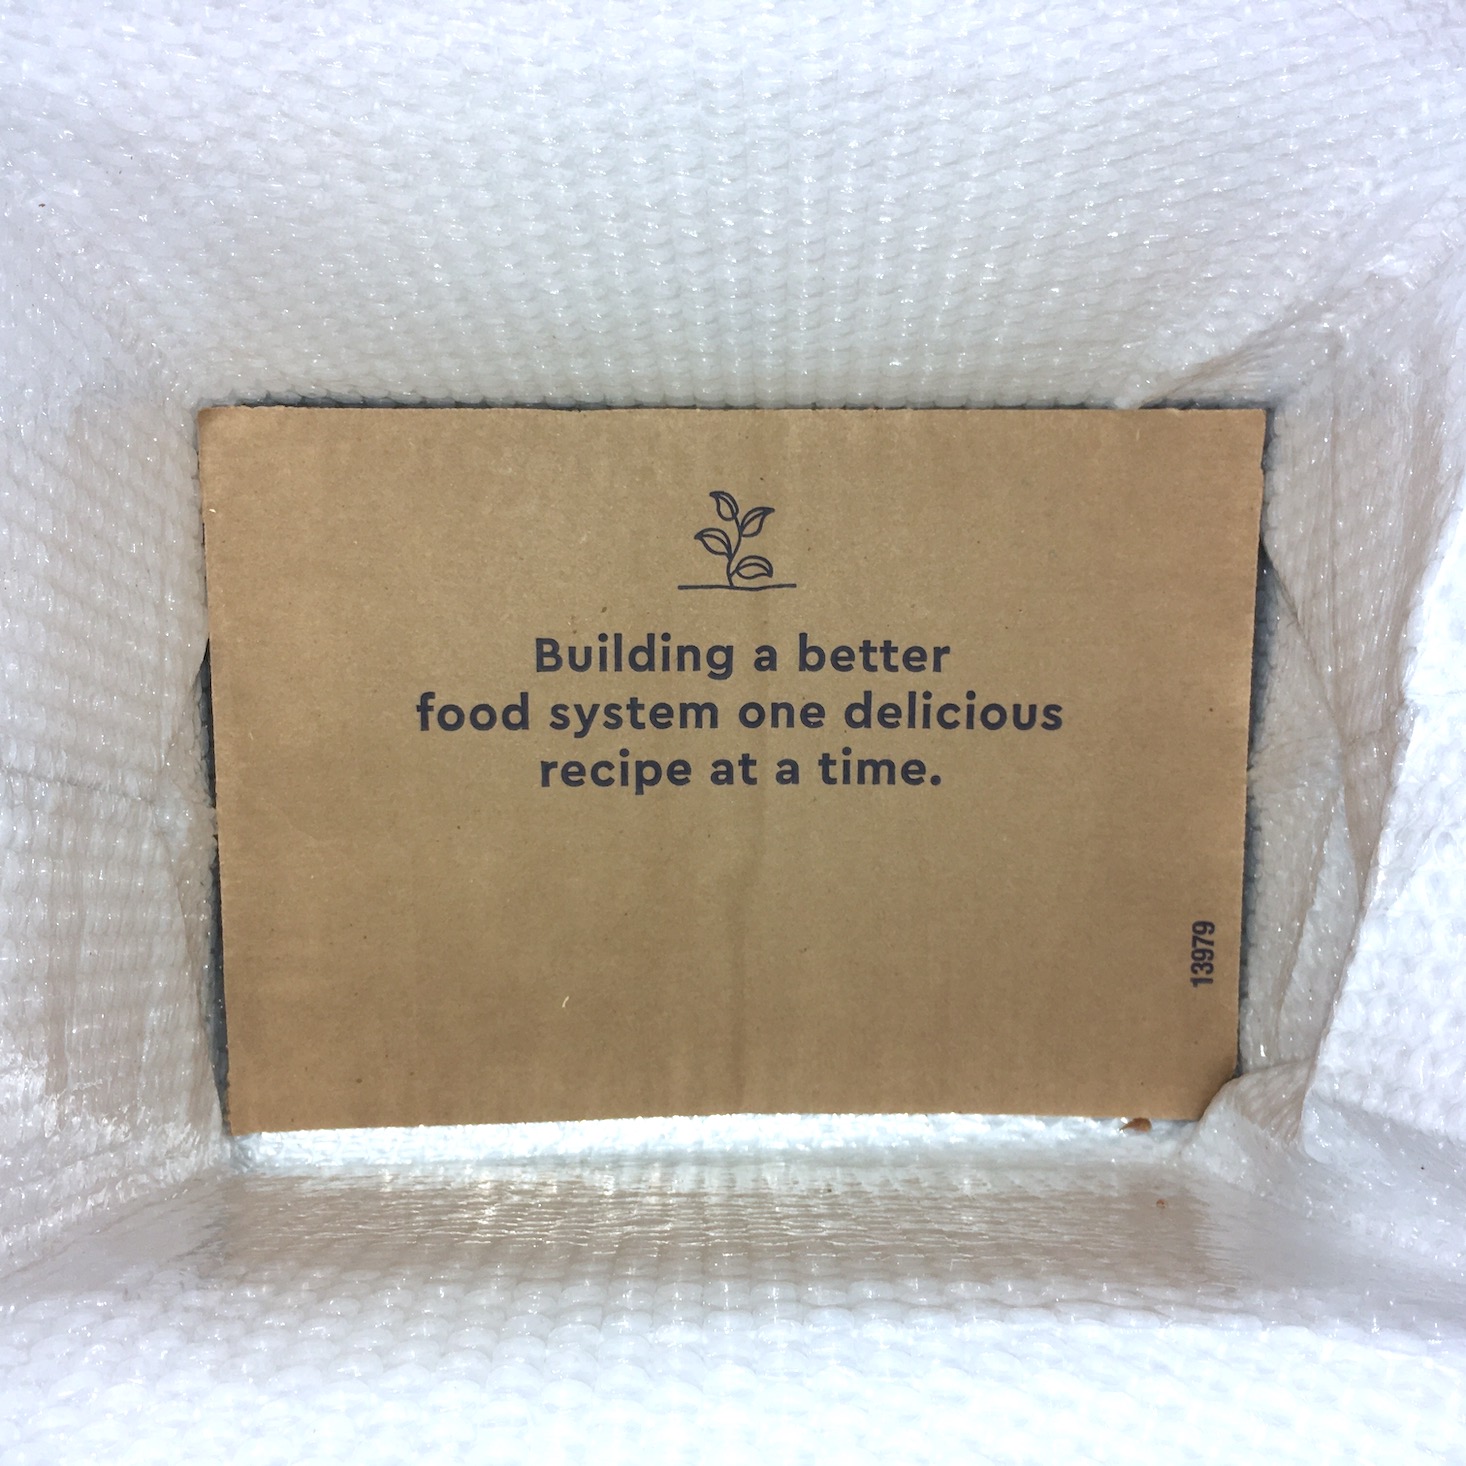 Blue Apron February 2020 - top view of box showing cardboard divider